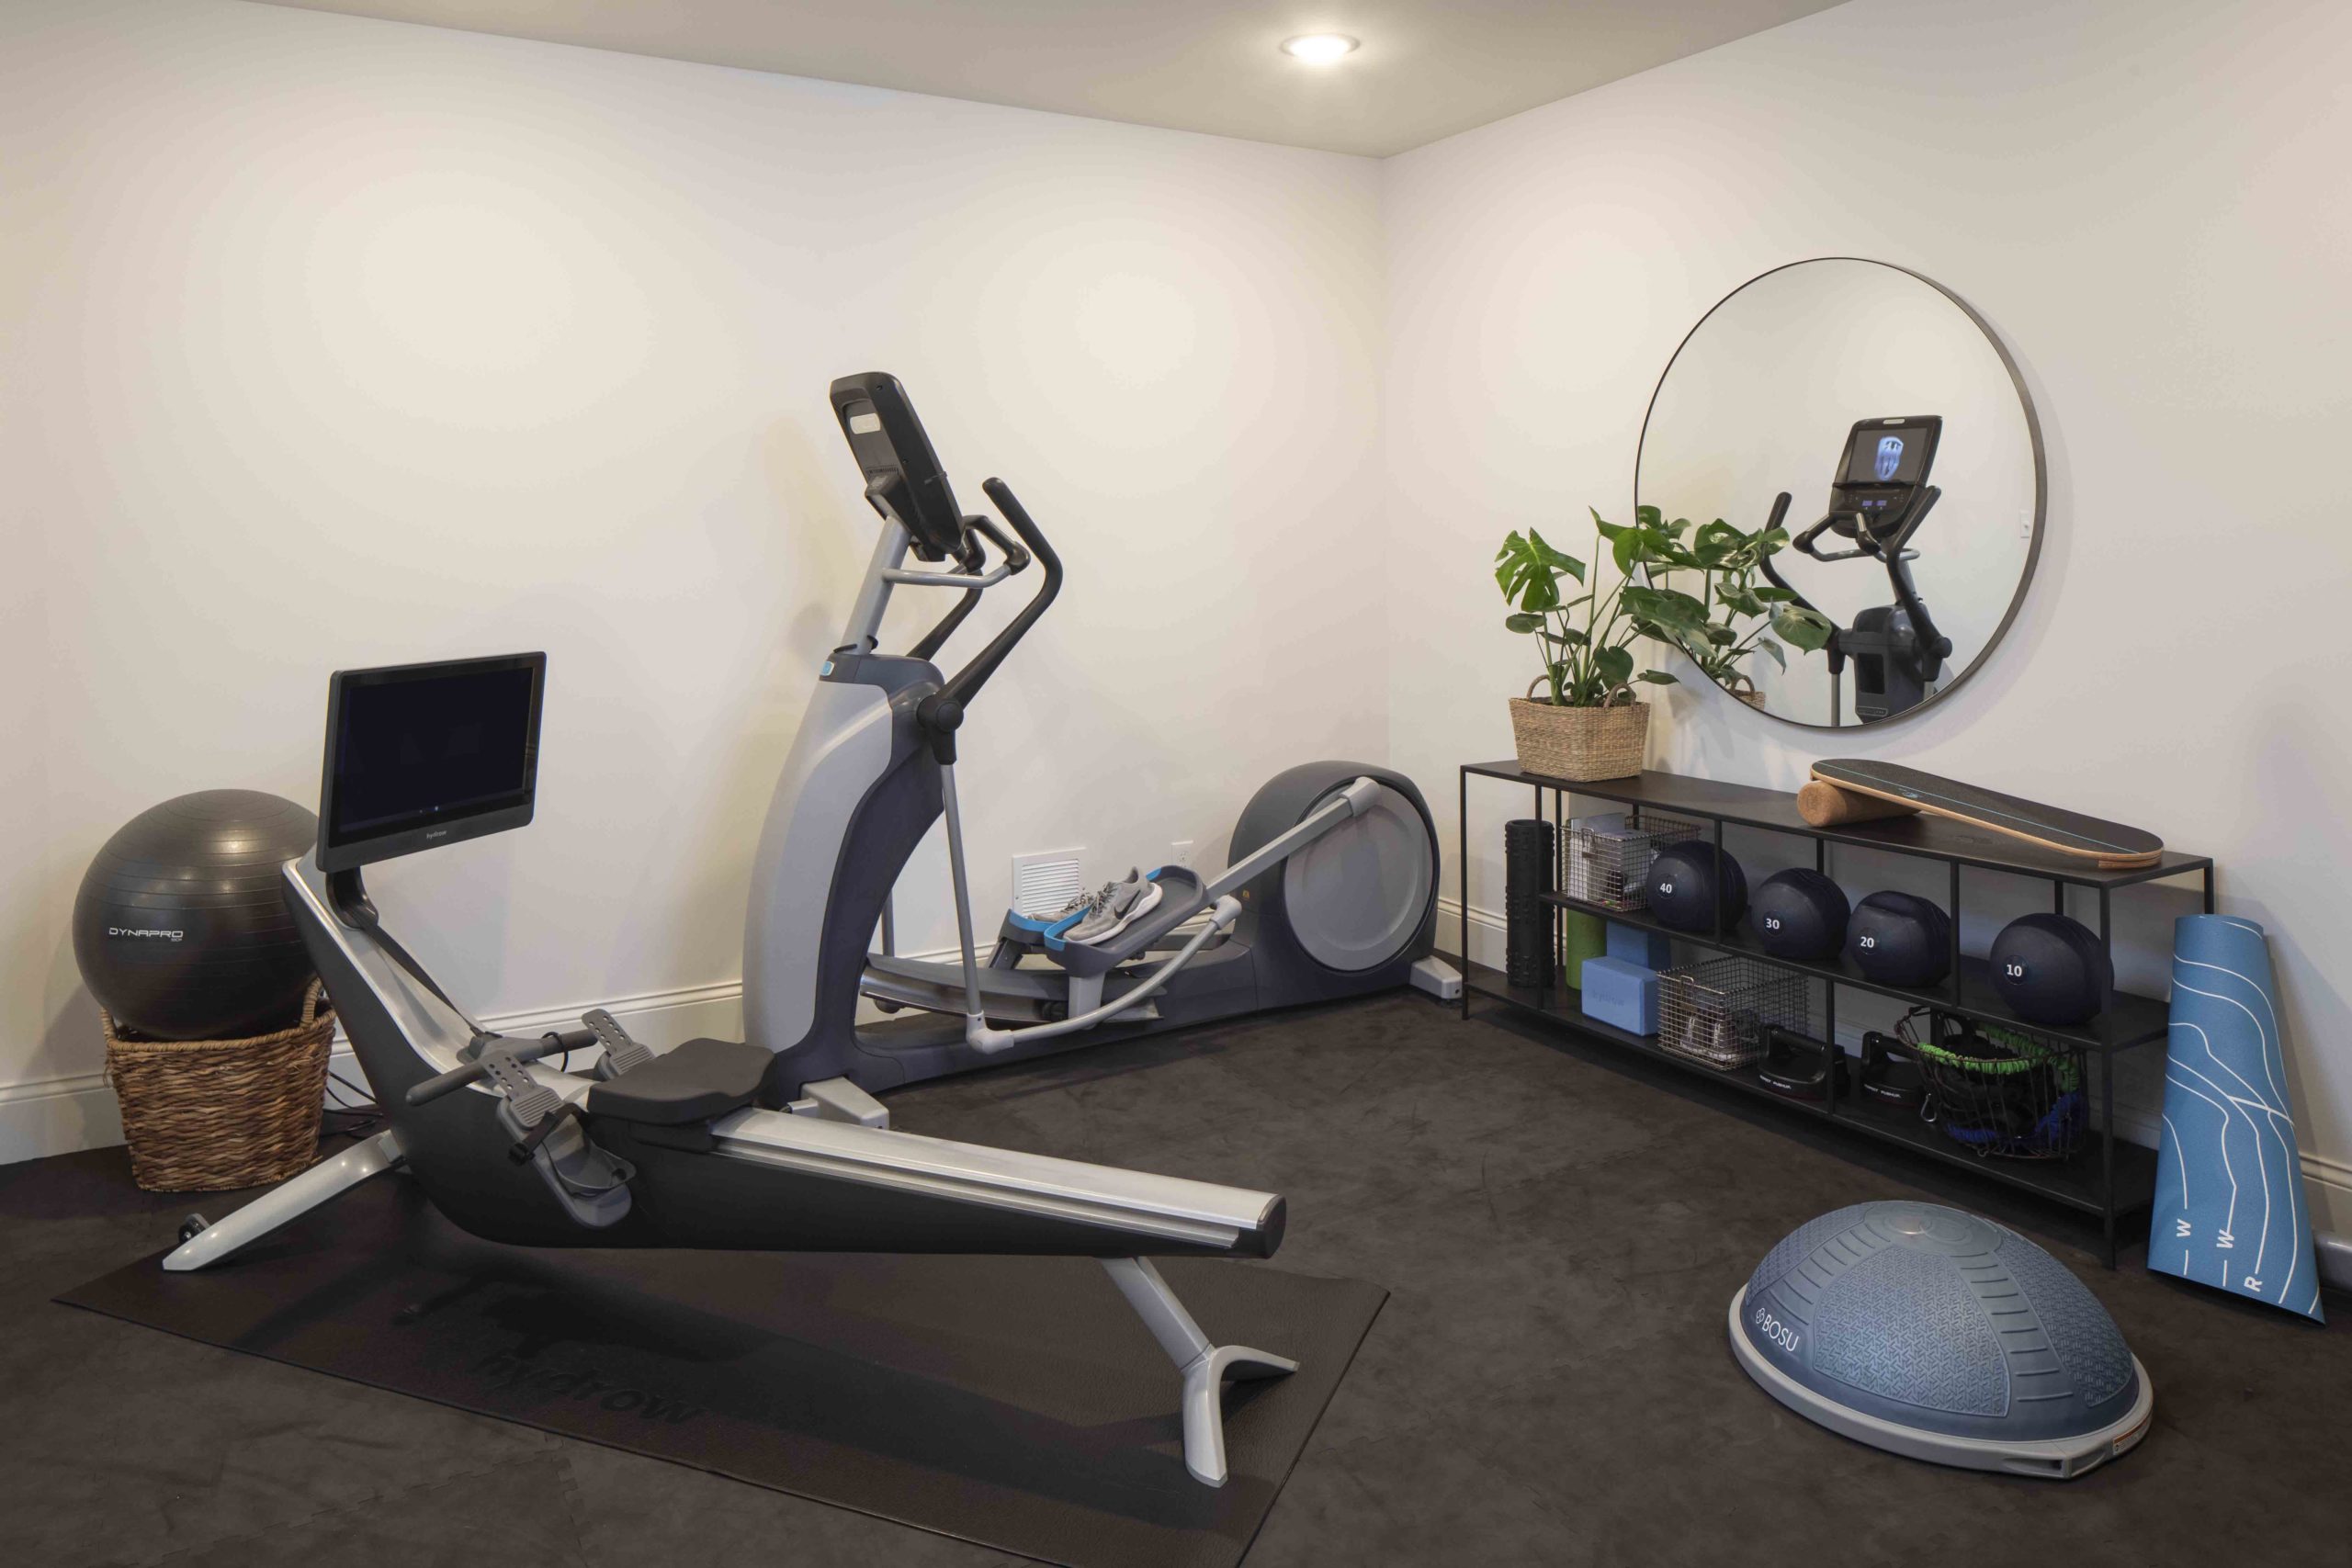 A prairie-style gym room with exercise equipment and a mirror.